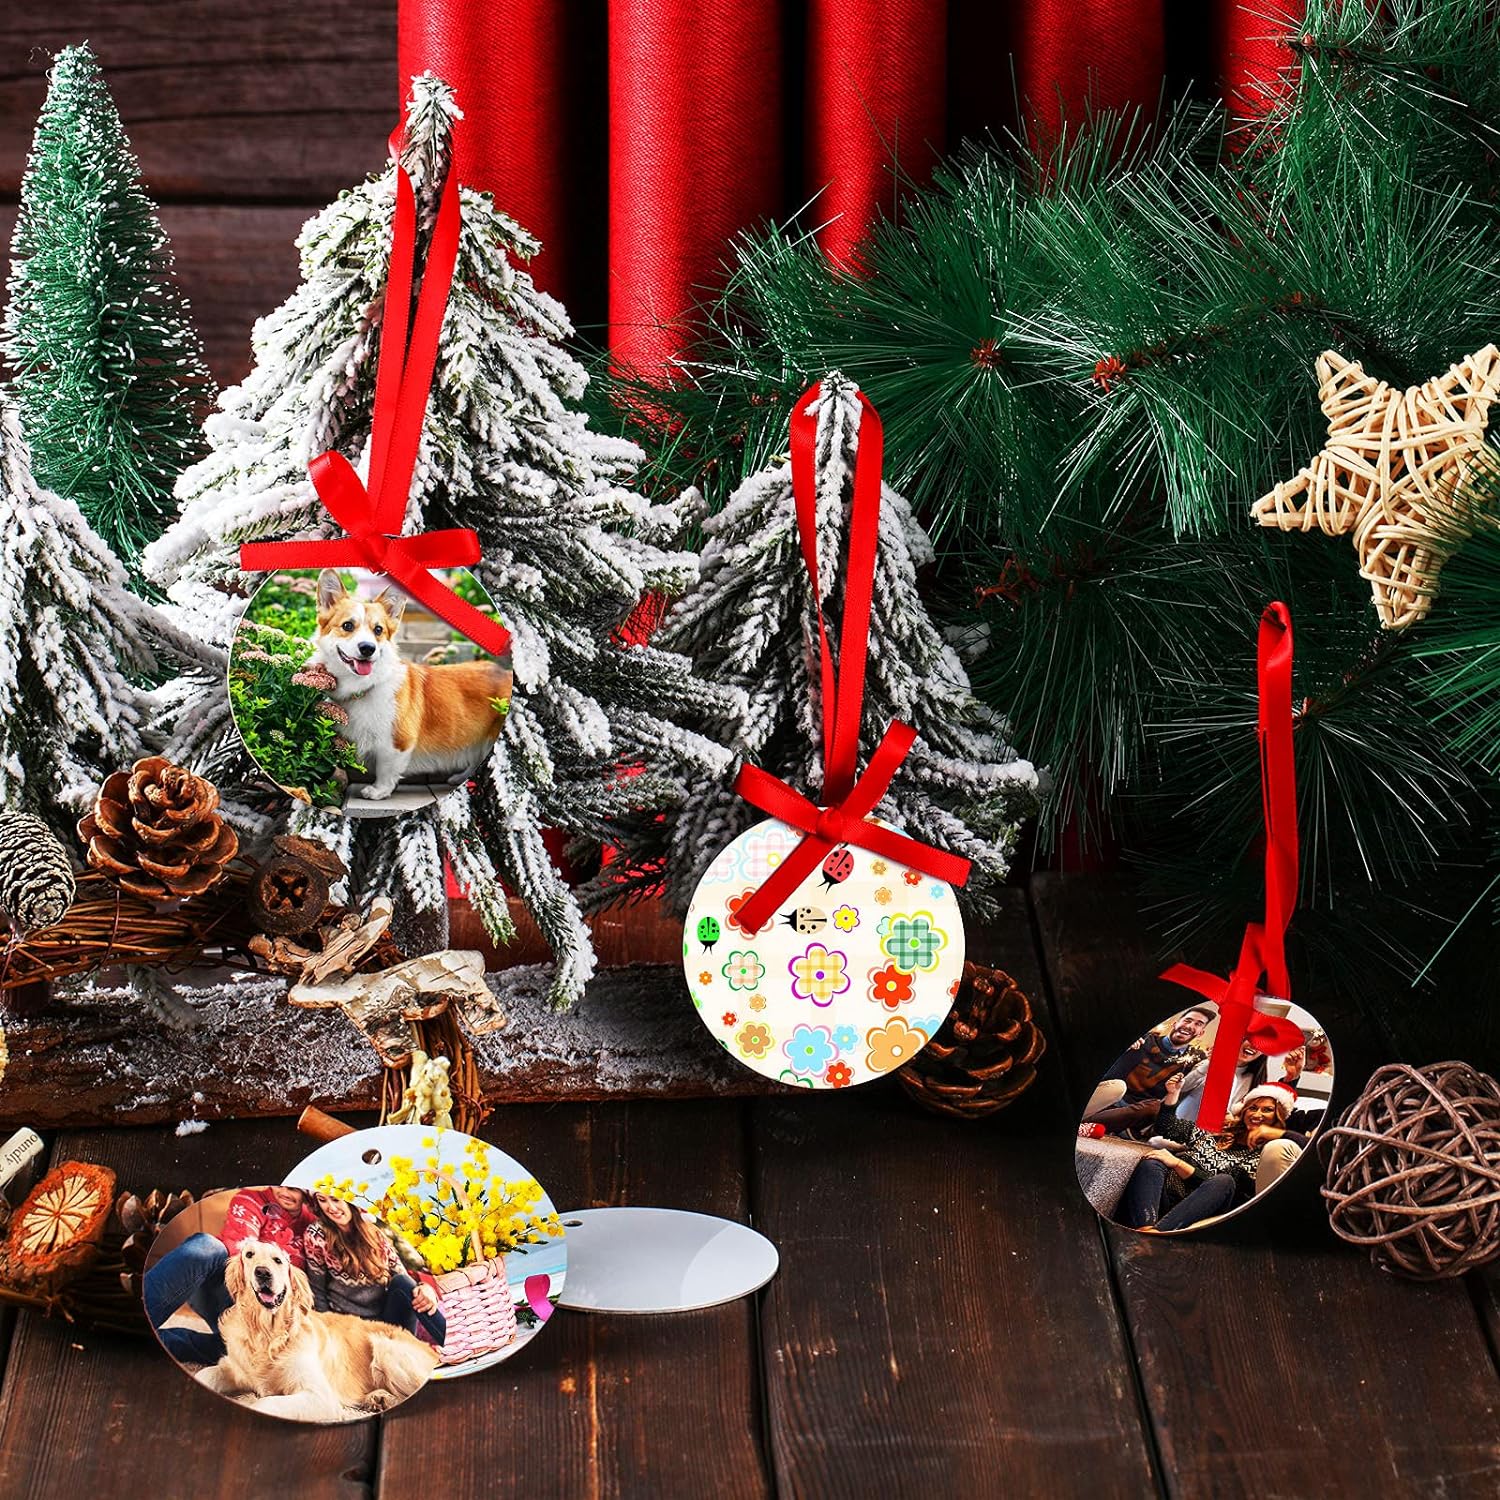 Sublimation Blank Christmas Ornament Pendants with Ribbon 10 Pack